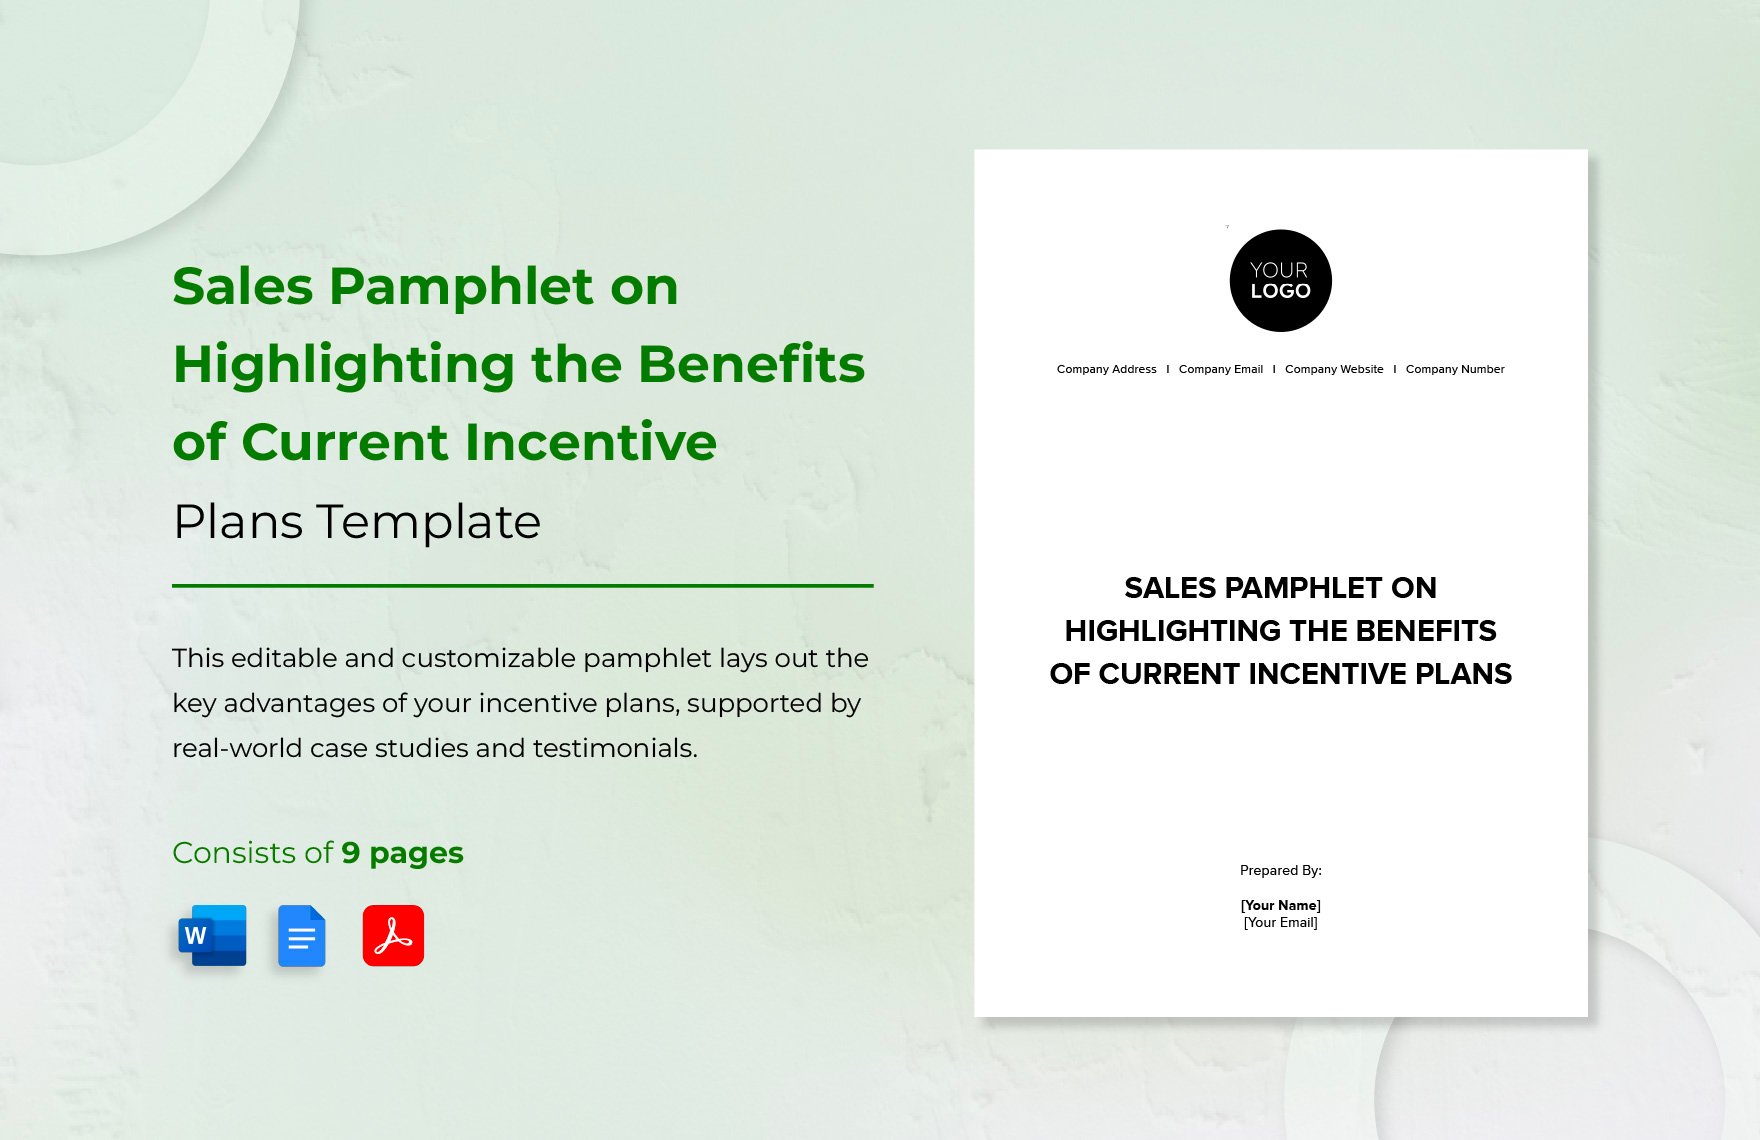 Sales Pamphlet on Highlighting the Benefits of Current Incentive Plans Template